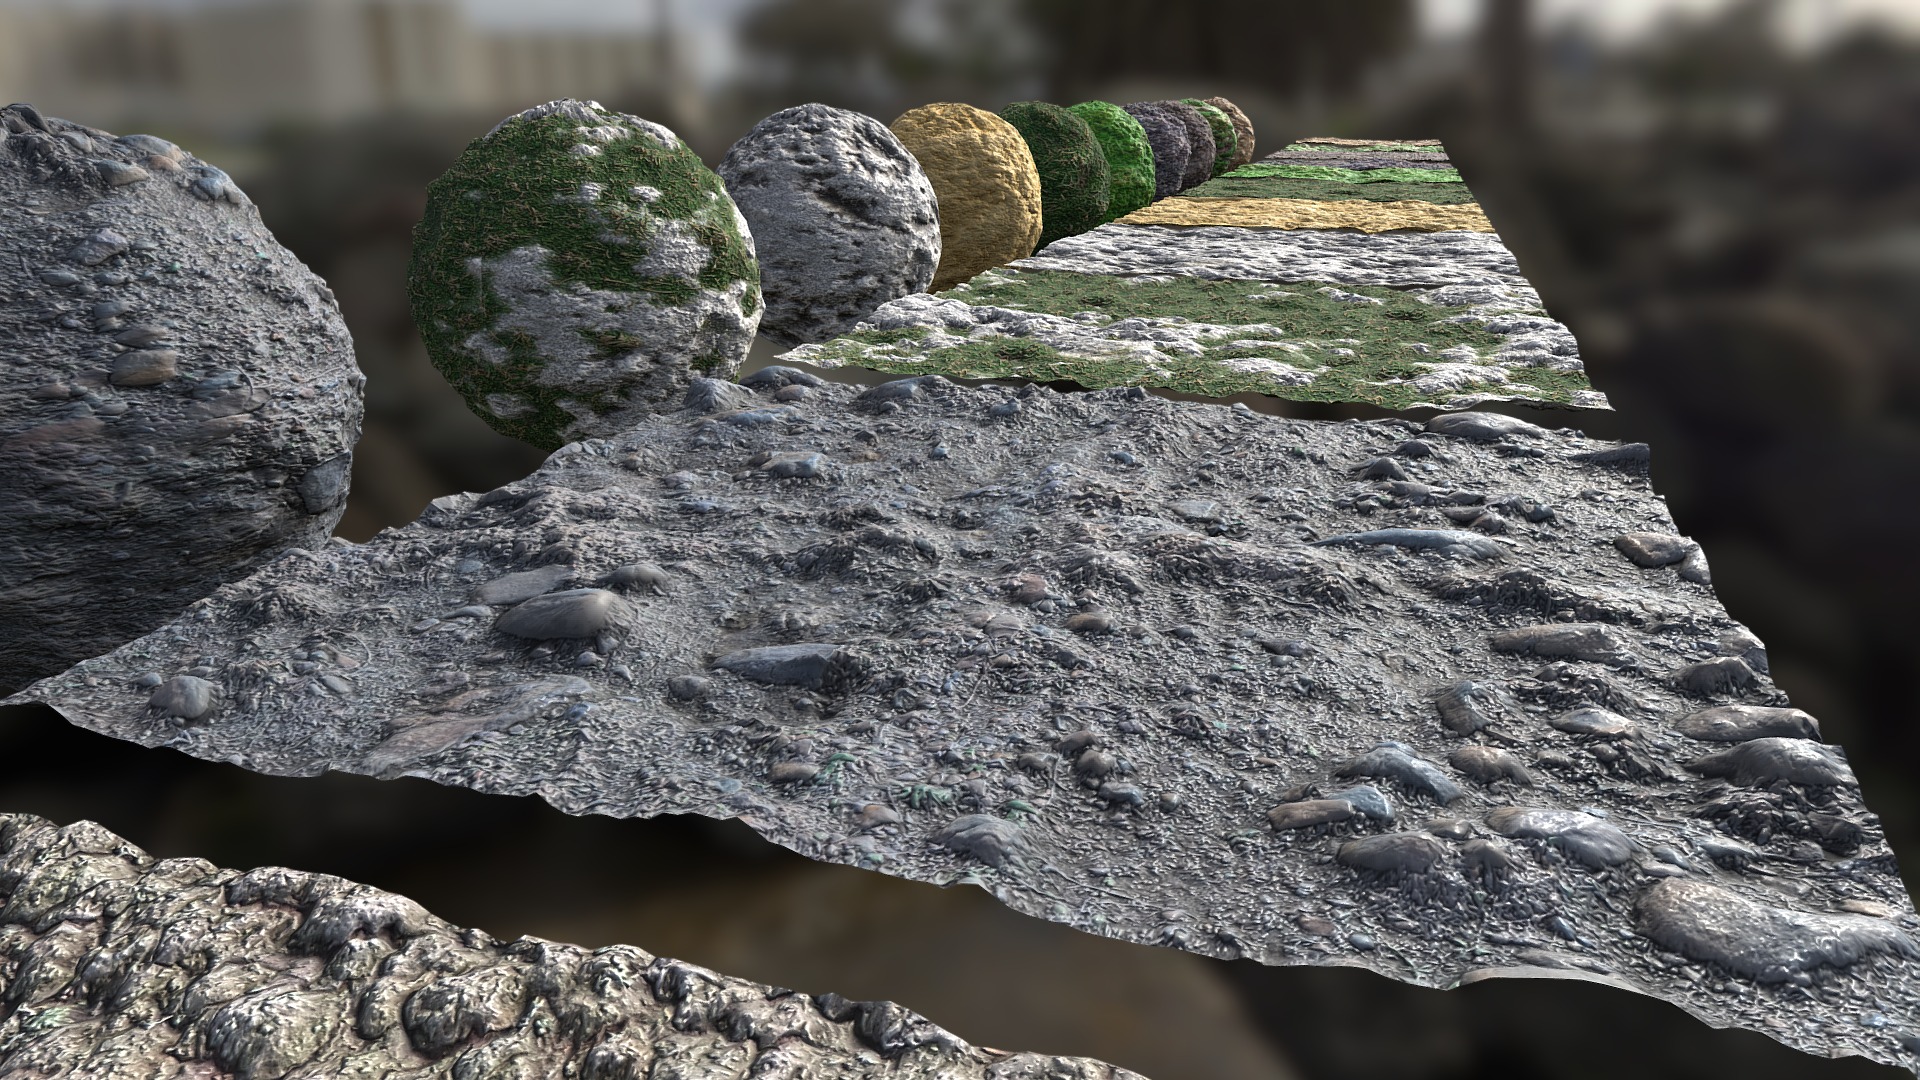 3D model PBR Textures - This is a 3D model of the PBR Textures. The 3D model is about a group of rocks.